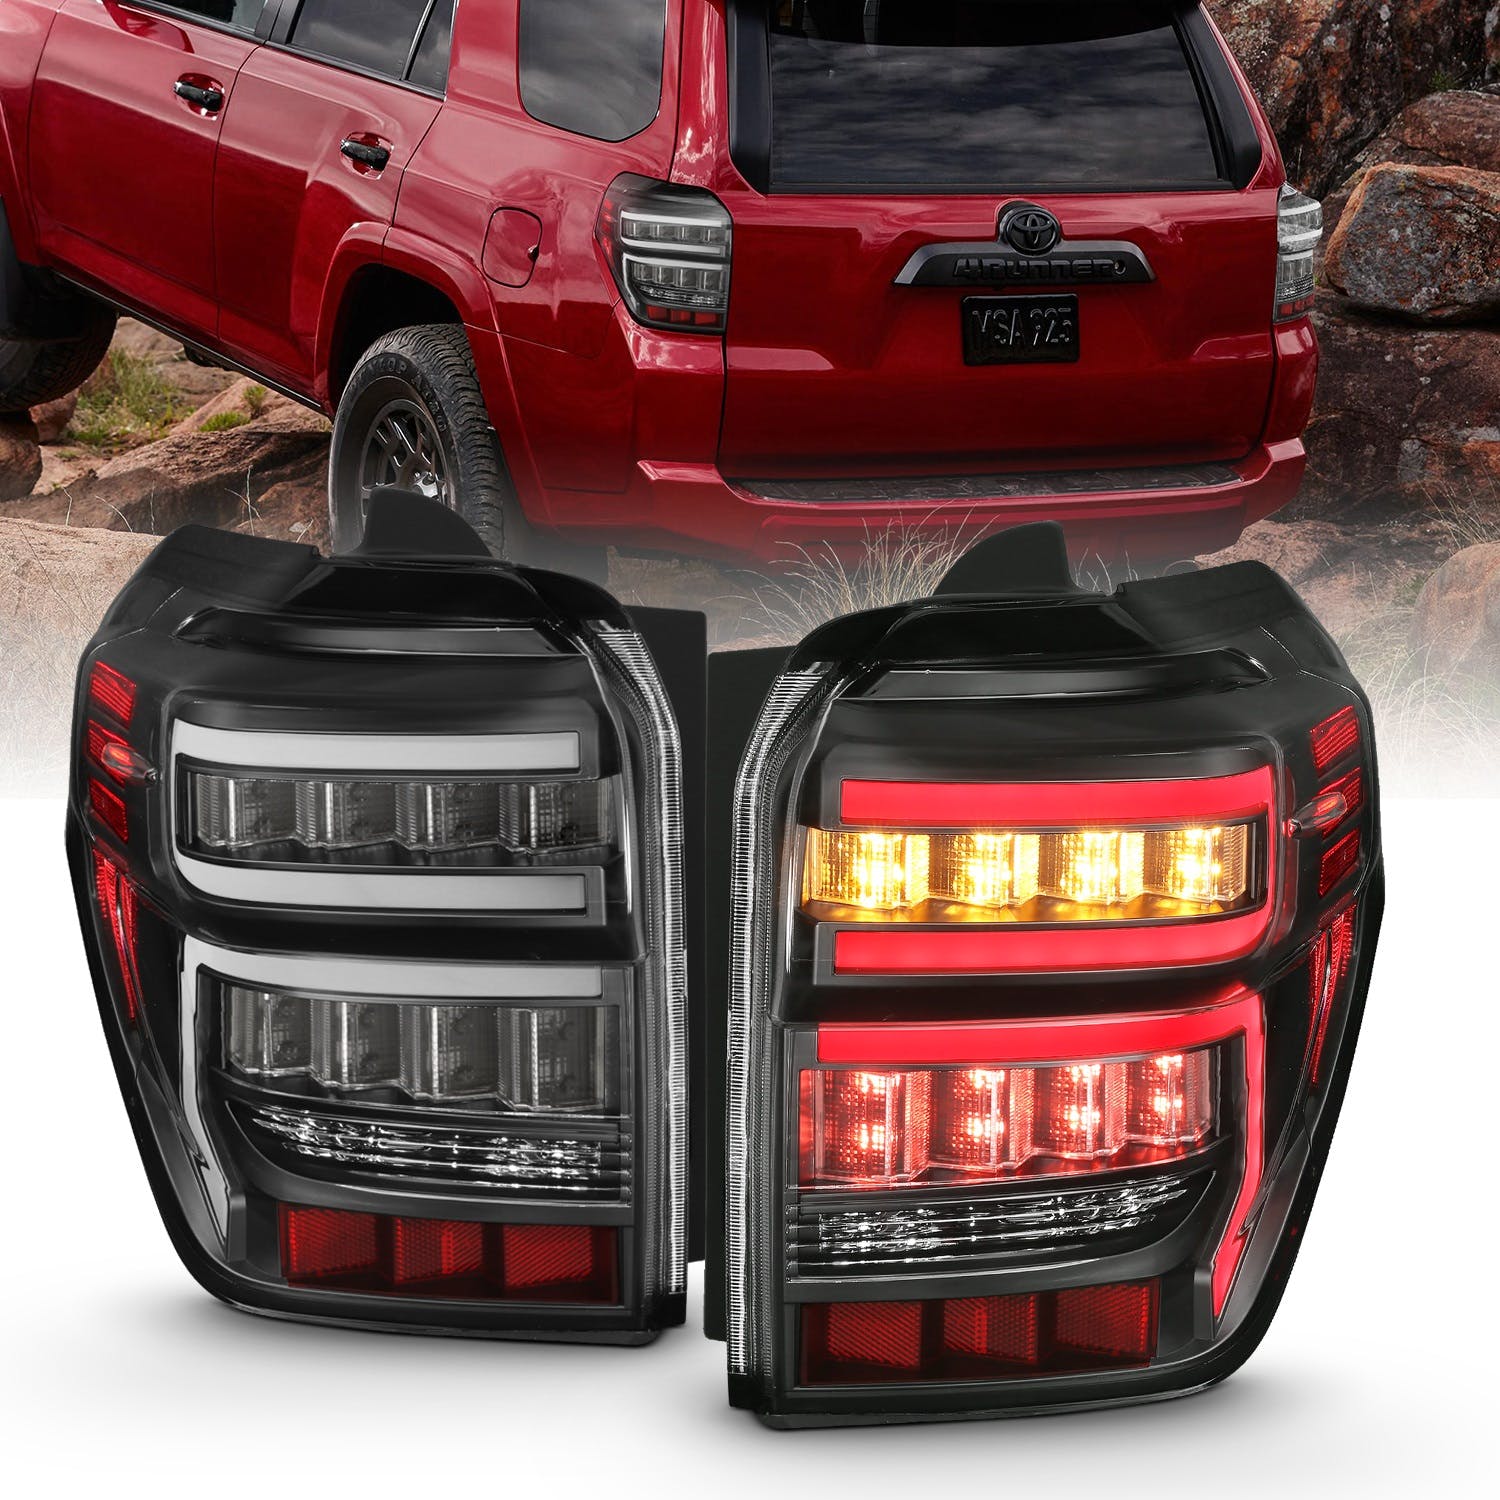 AnzoUSA 311311 Tail Lights Black Housing Clear Lens Red Light Bar With sequential